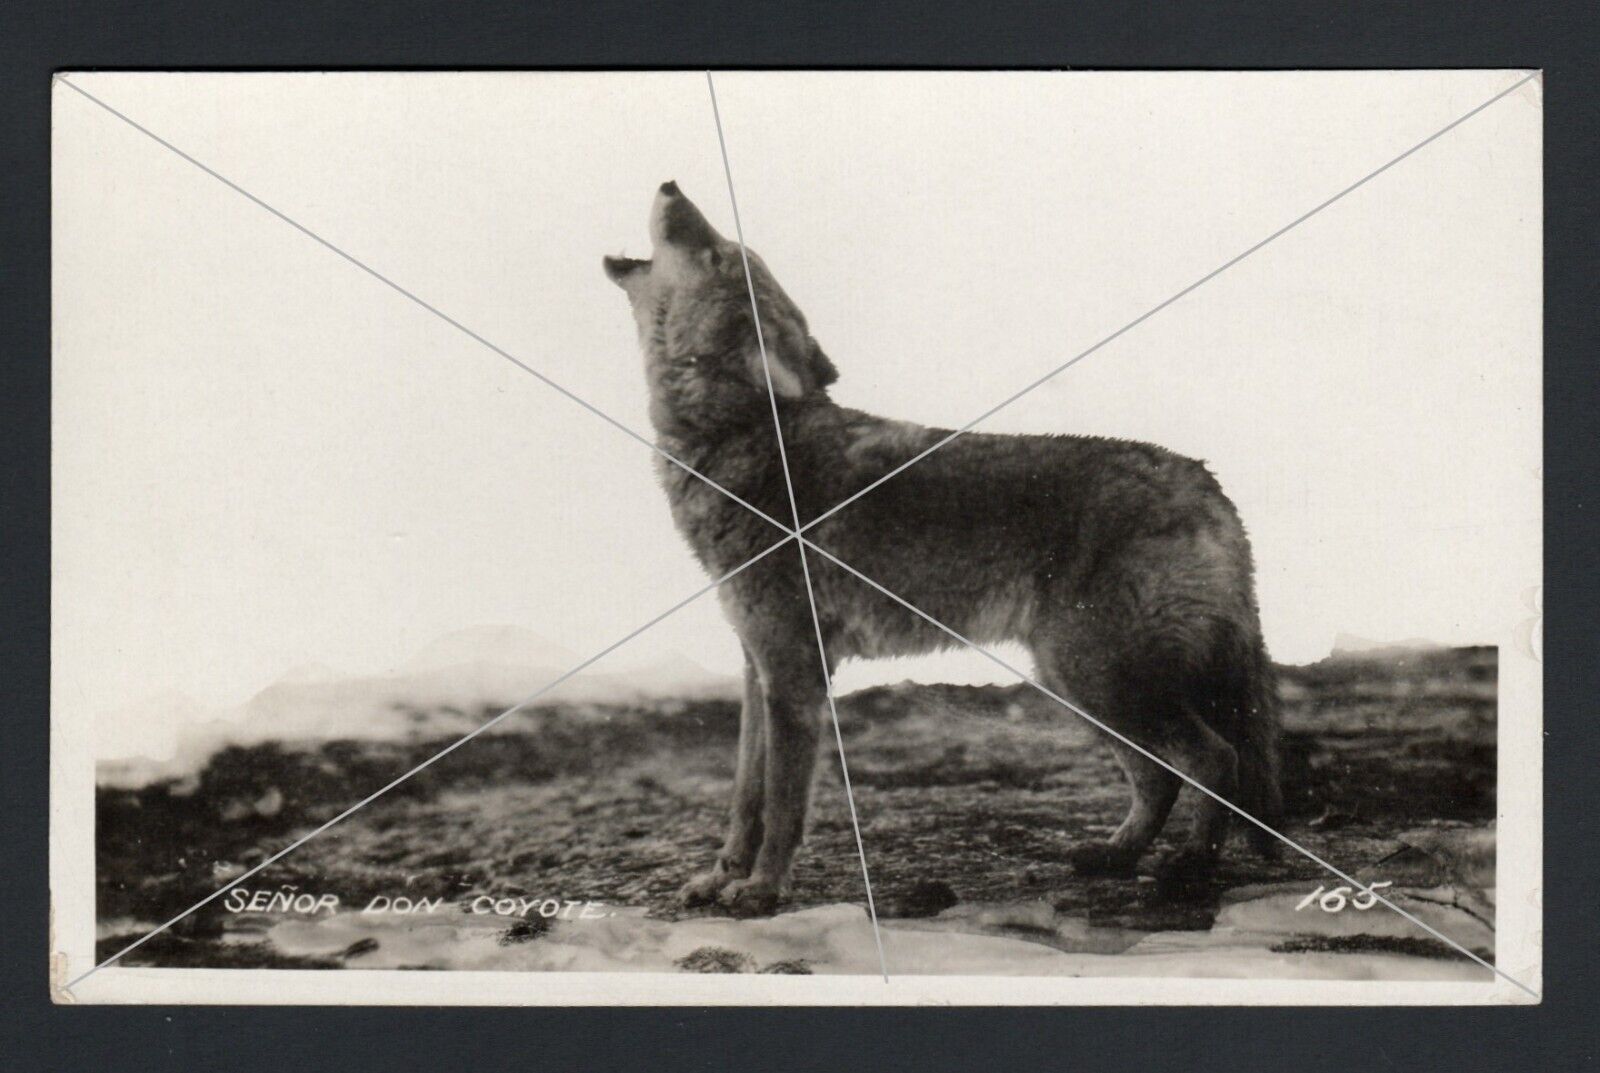 Senor Don Coyote Howling Pose New Mexico 1924-1929 RPPC Postcard Antique Vintage